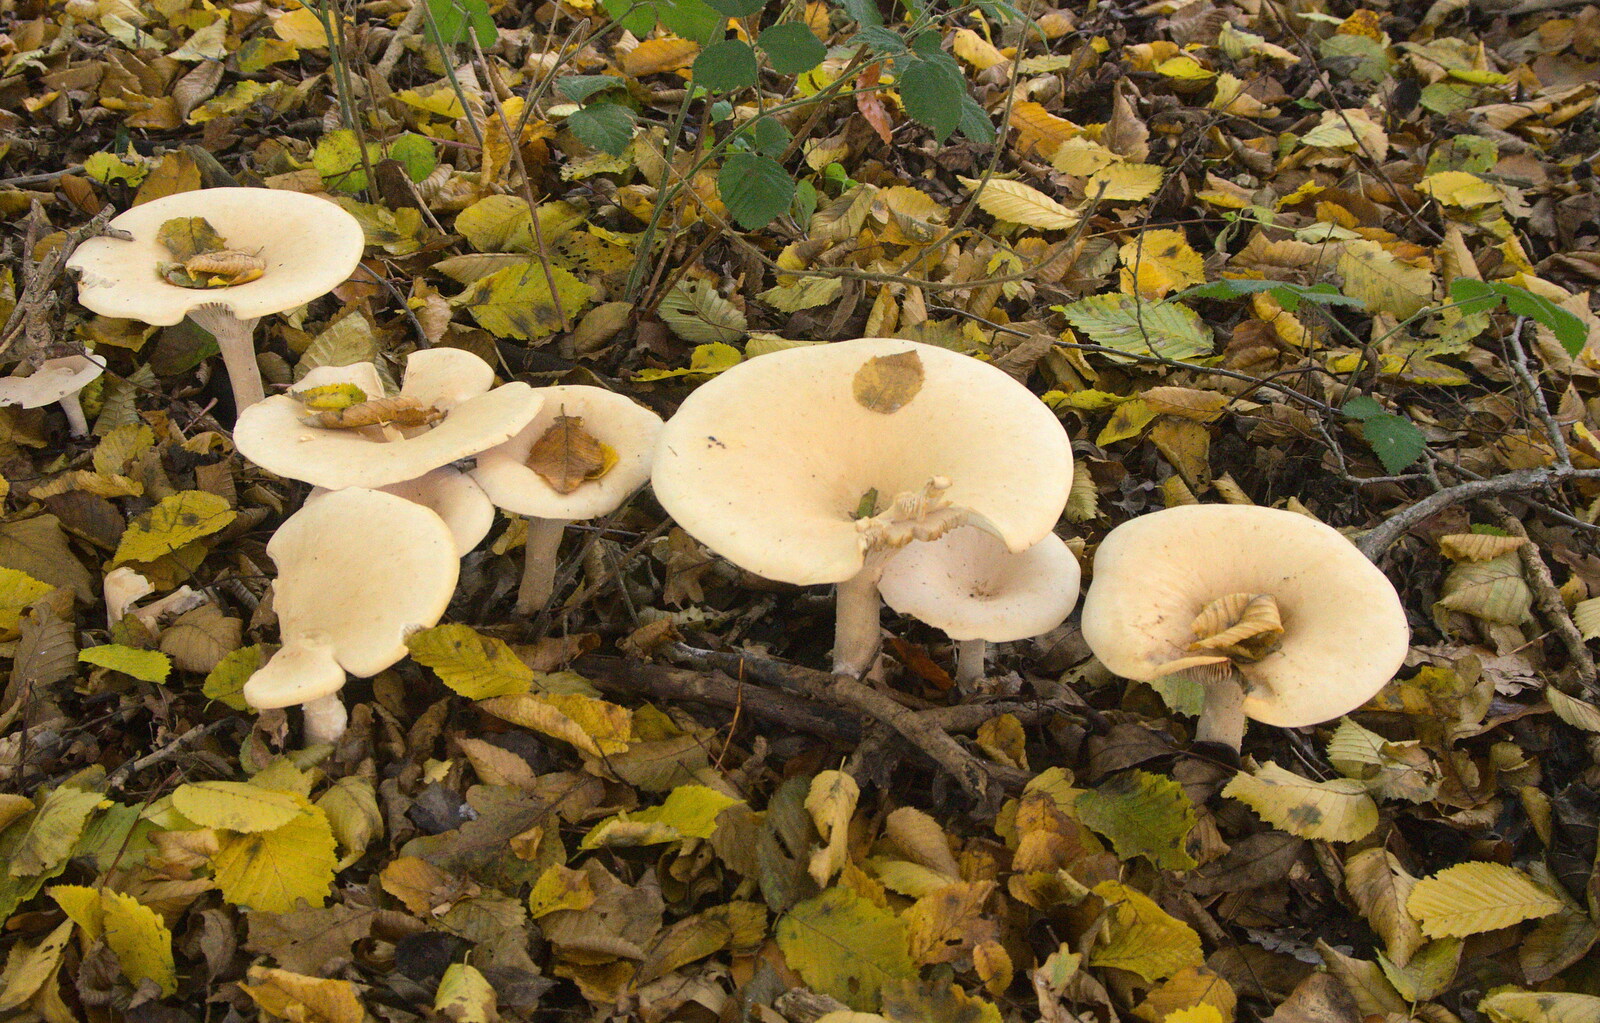 A line of mushrooms from A Busy Day, Southwold and Thornham, Suffolk - 11th November 2012